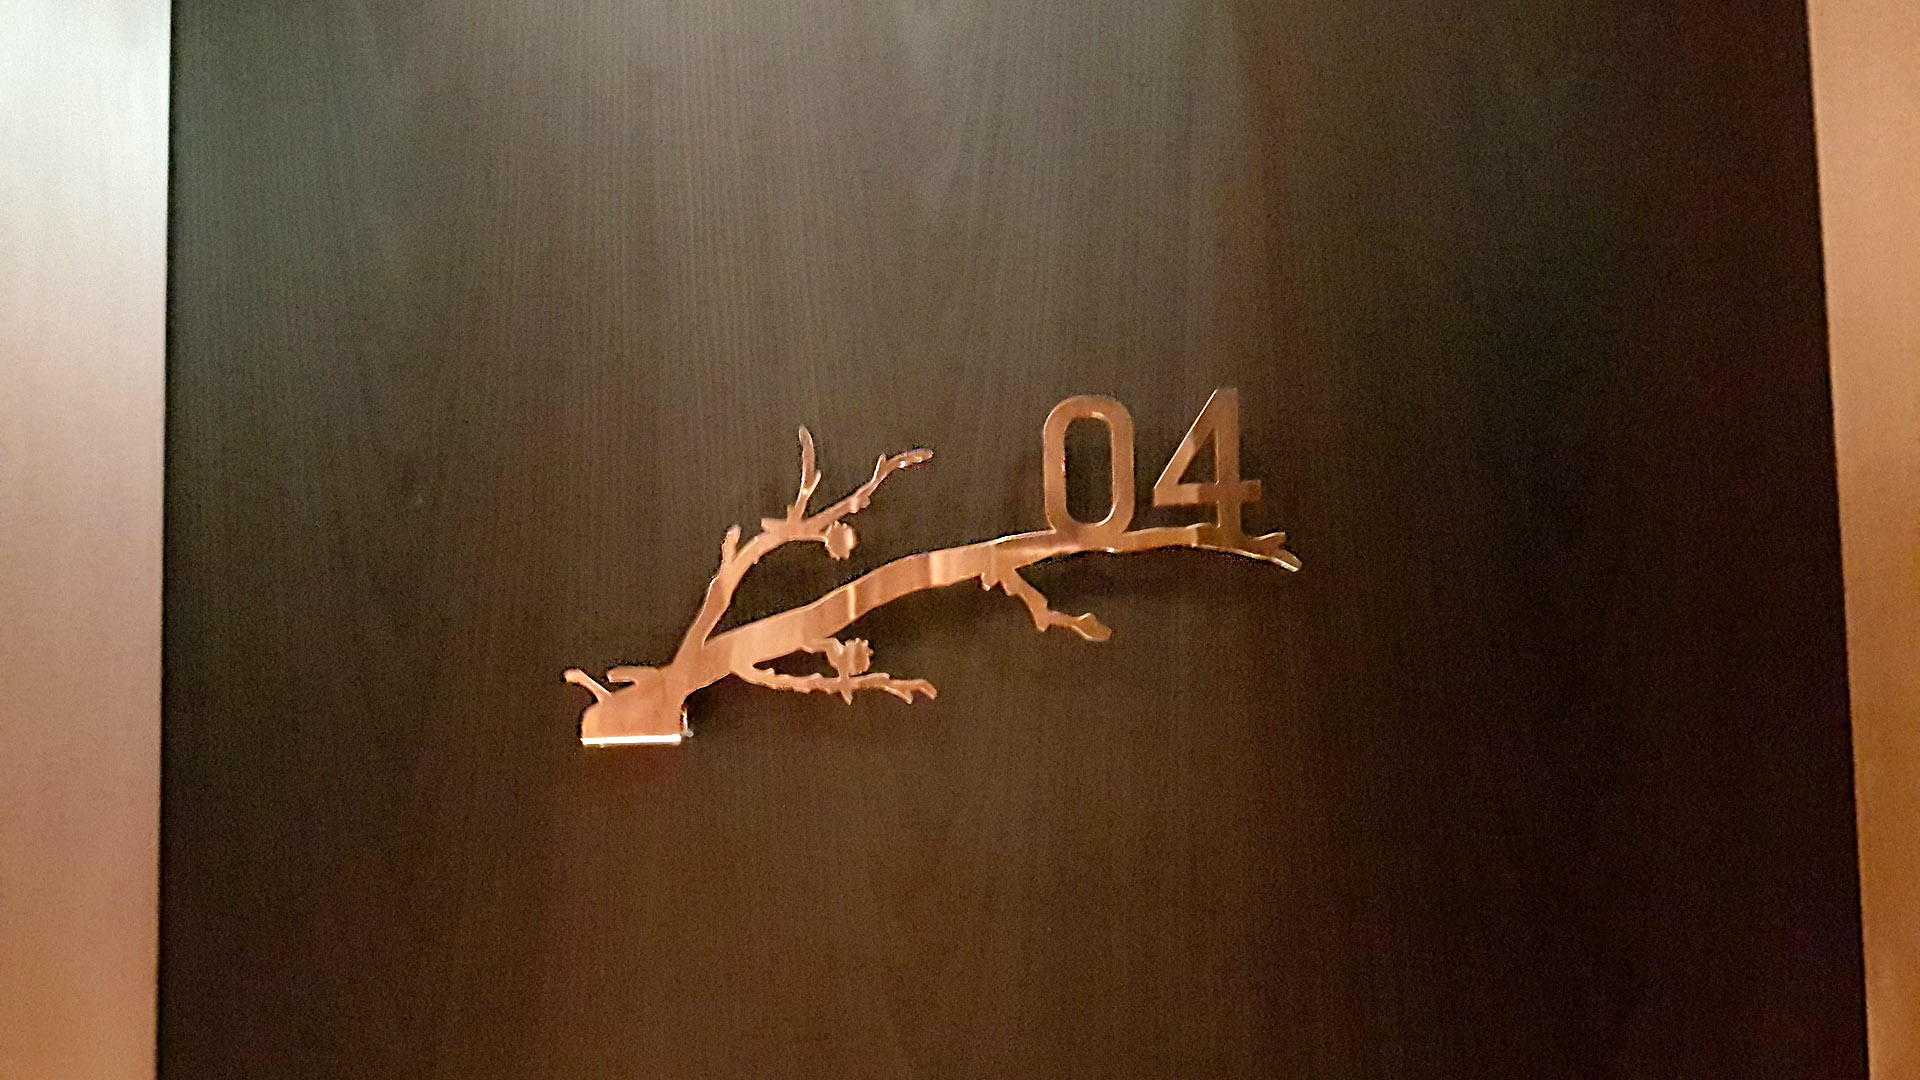 Internal Signs made from pure copper for Katara Beach Club - LivNordic Spa & Wellness fabricated and installed by ME Visual, Qatar